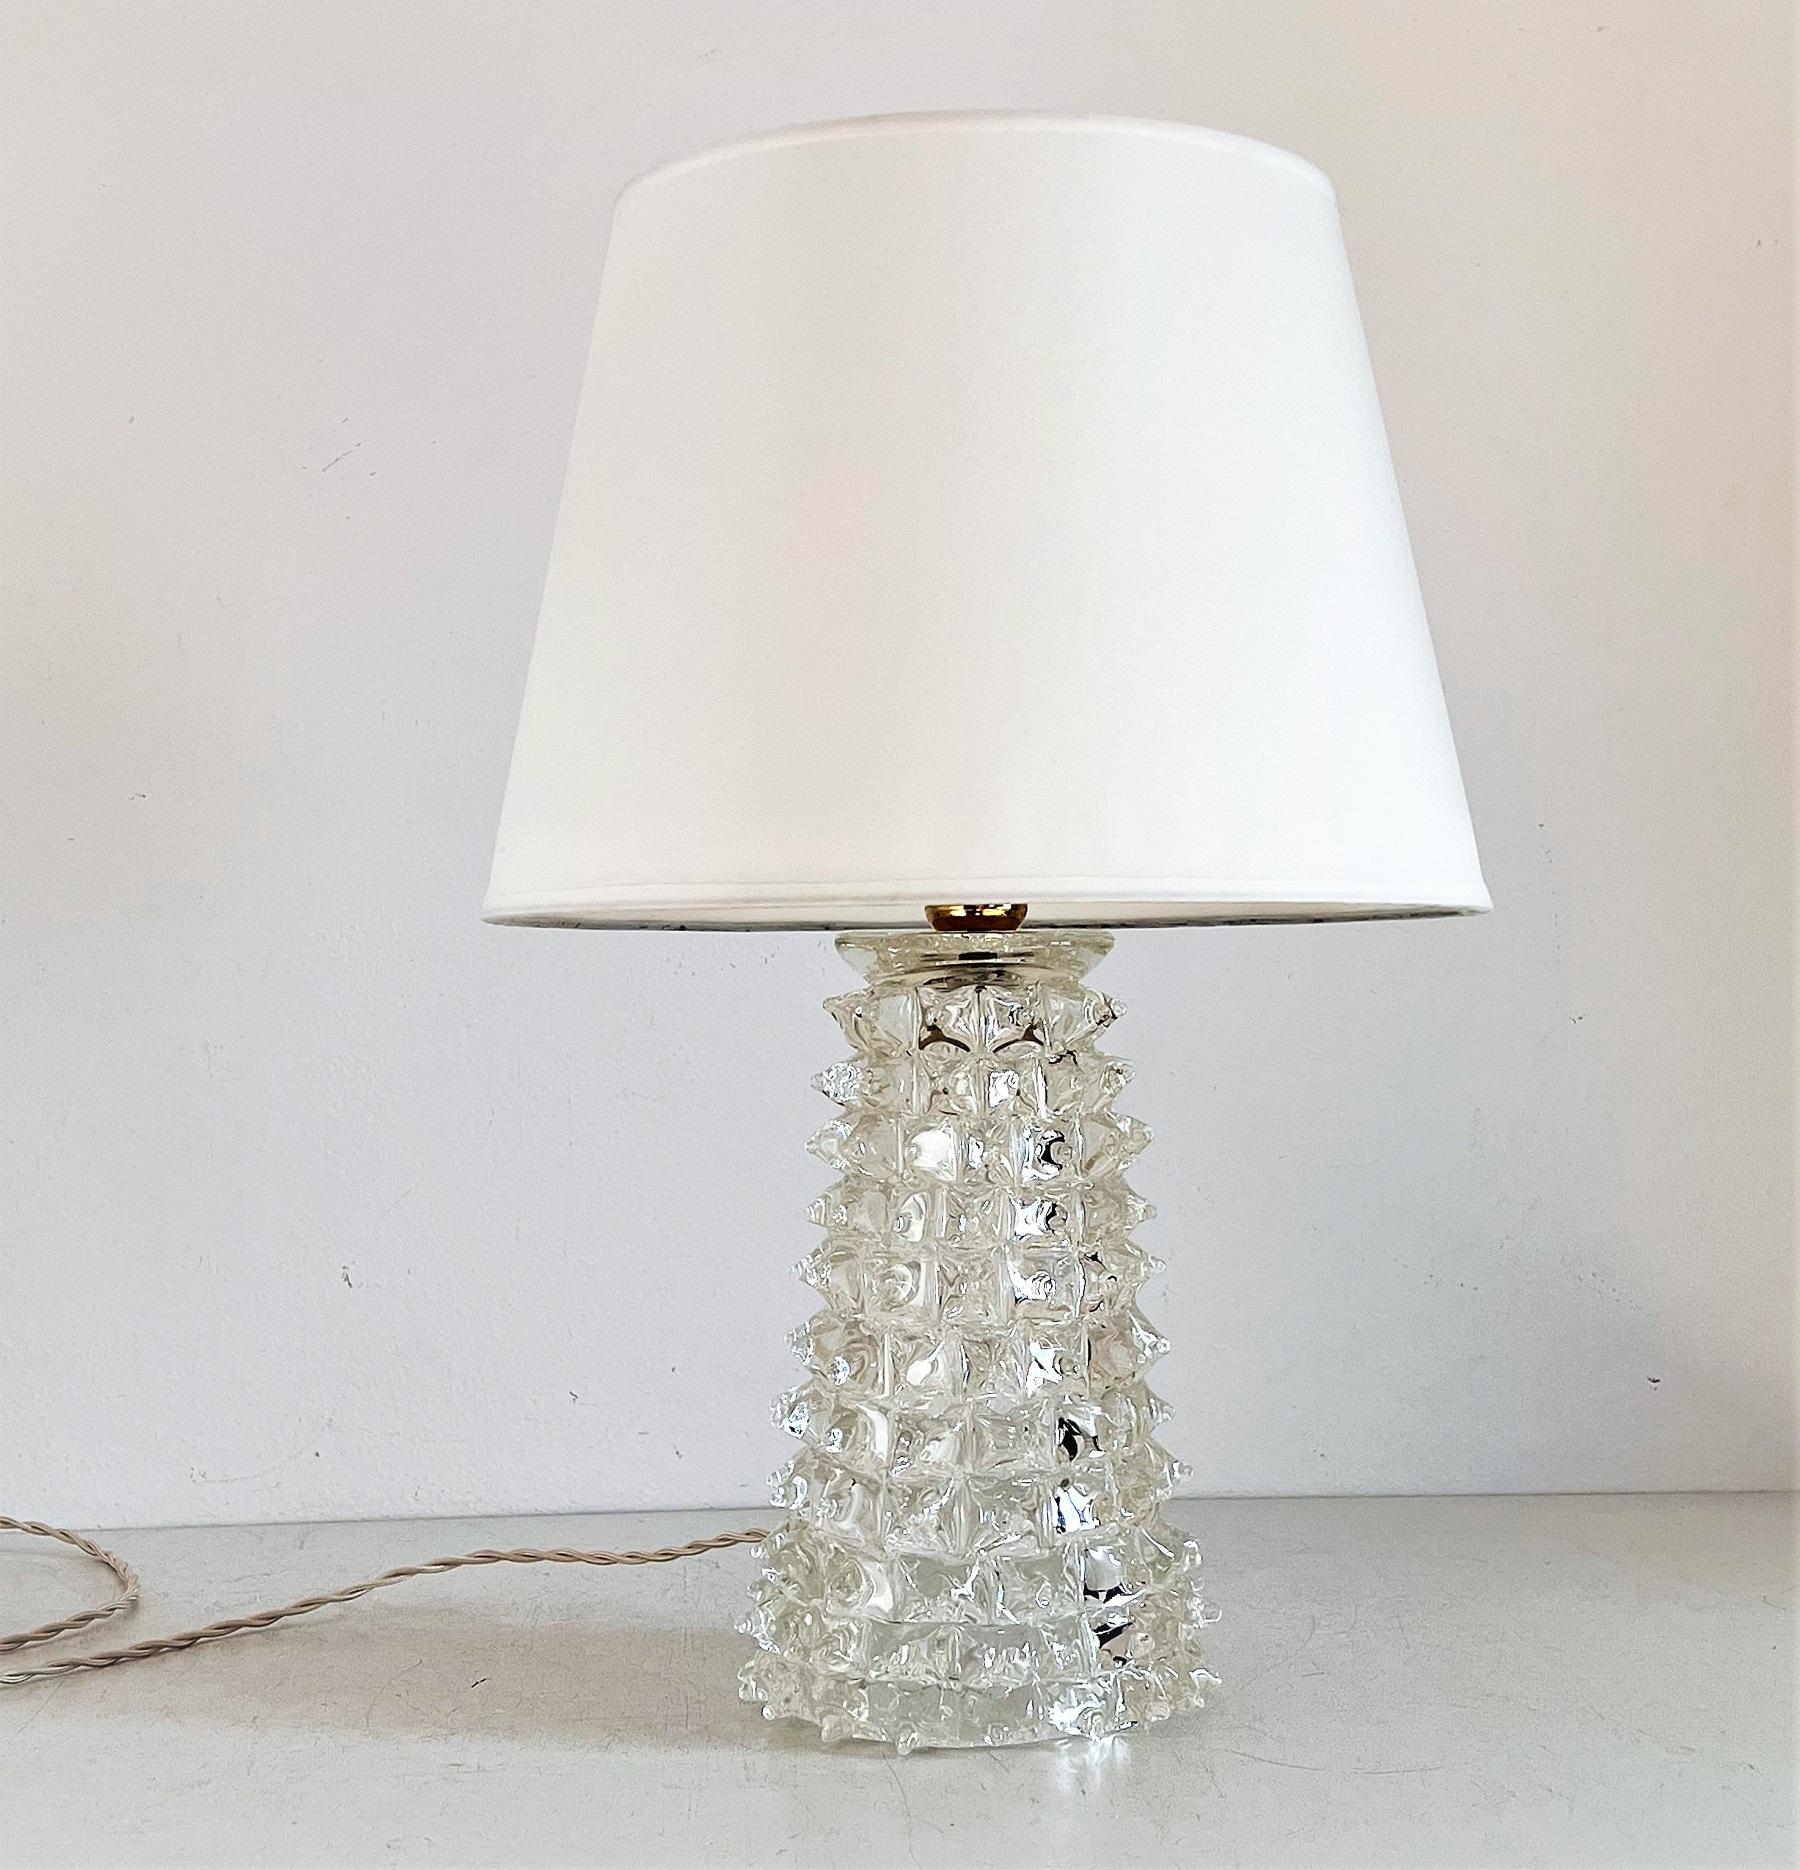 Mid-Century Modern Italian Midcentury Rostrato Crystal Glass Table Lamp in Barovier Toso Style 1950